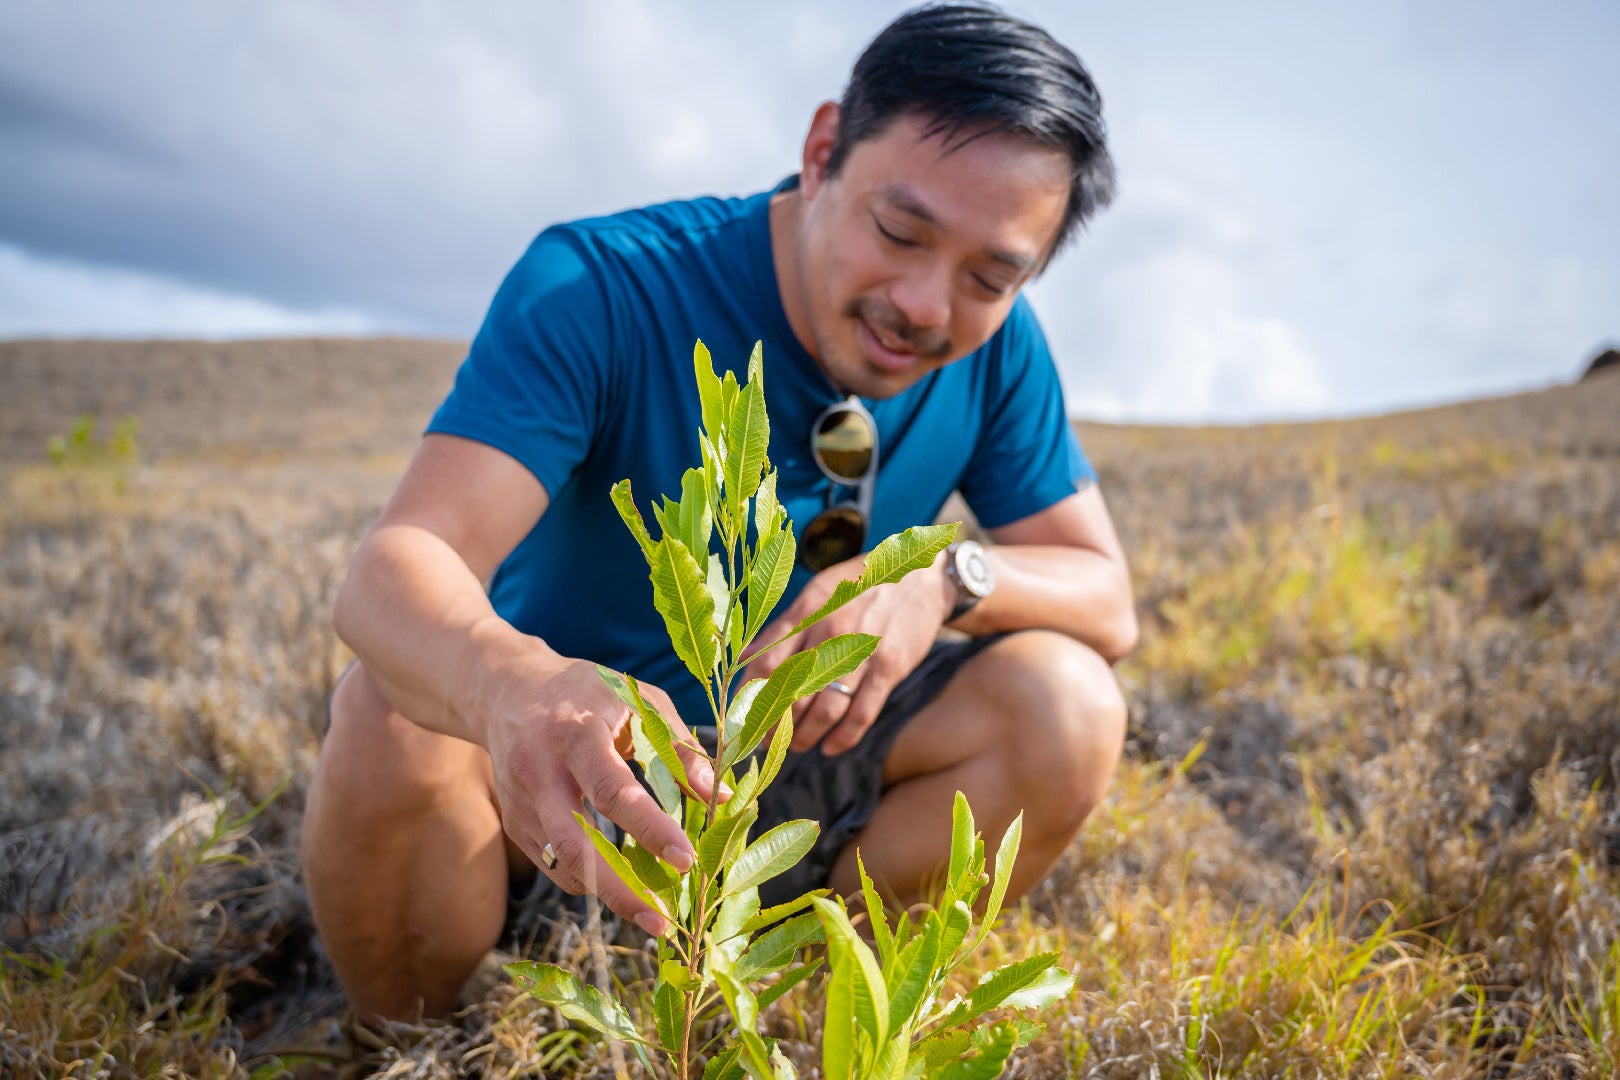 Ex Reddit CEO Yishan Wong in Hawaii where he launched Terraformation, a project that wants to plant one trillion trees to combat the climate crisis